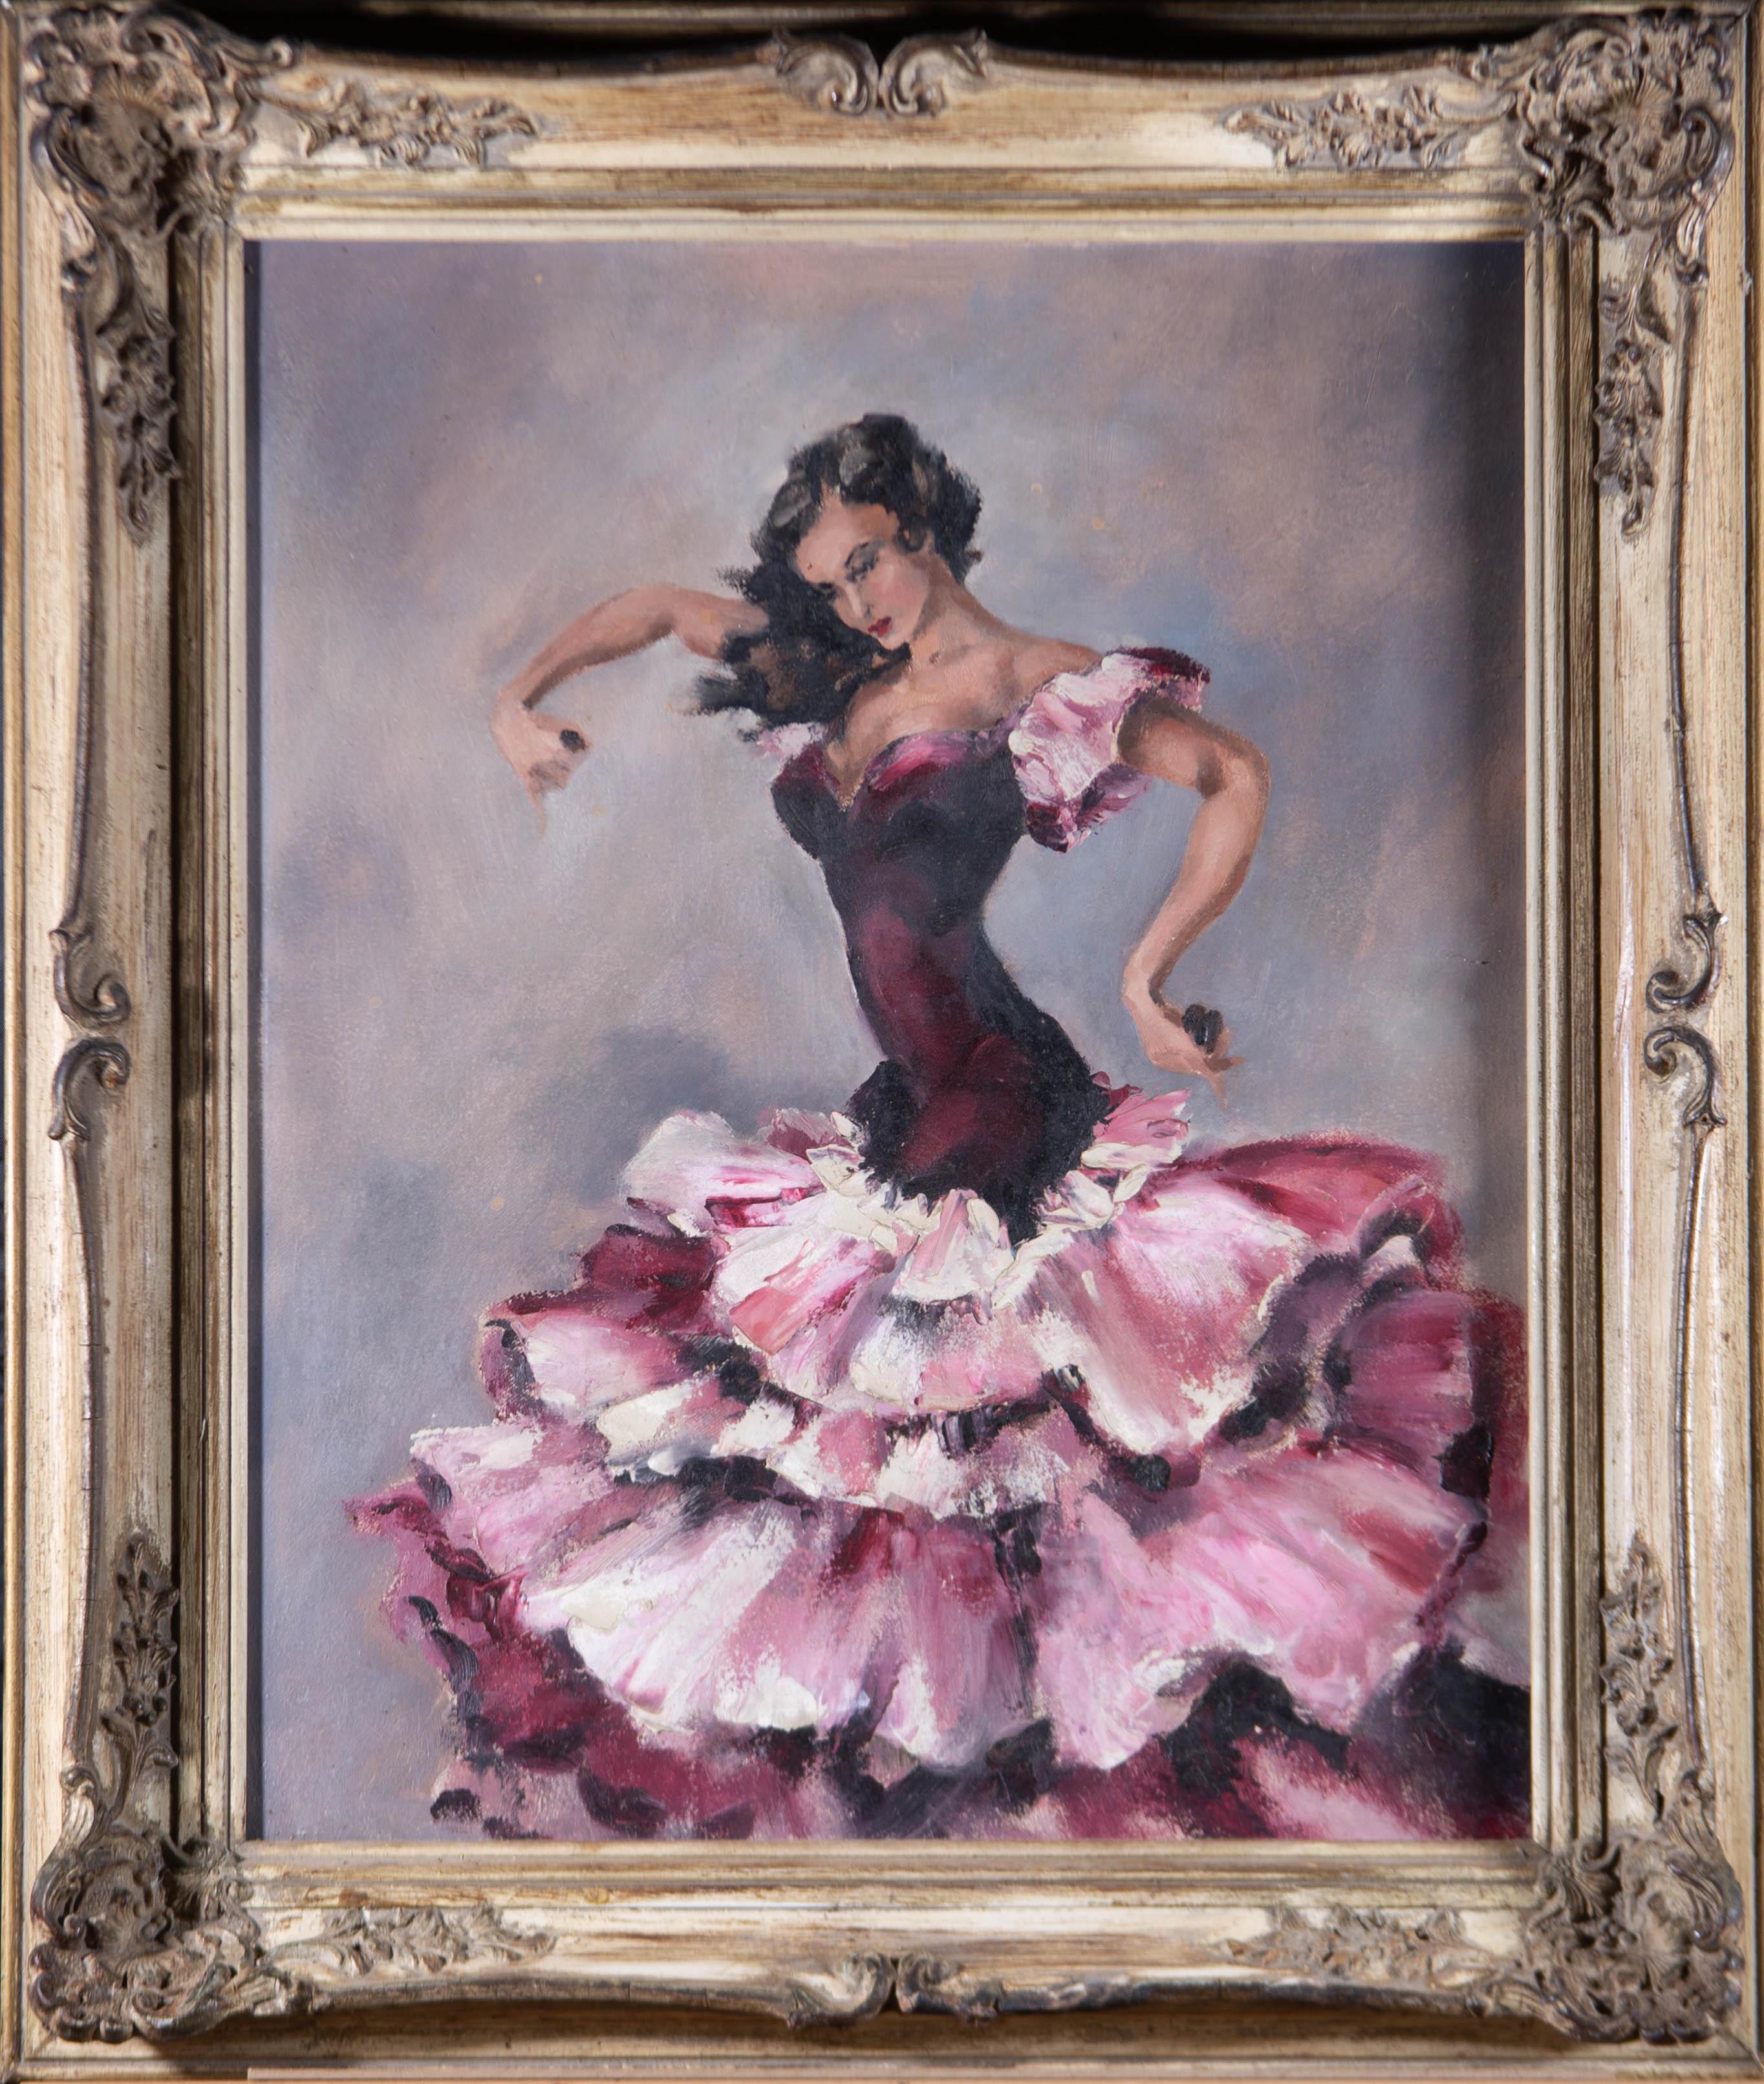 Unknown Portrait Painting - Framed Mid 20th Century Oil - The Flamenco Dancer